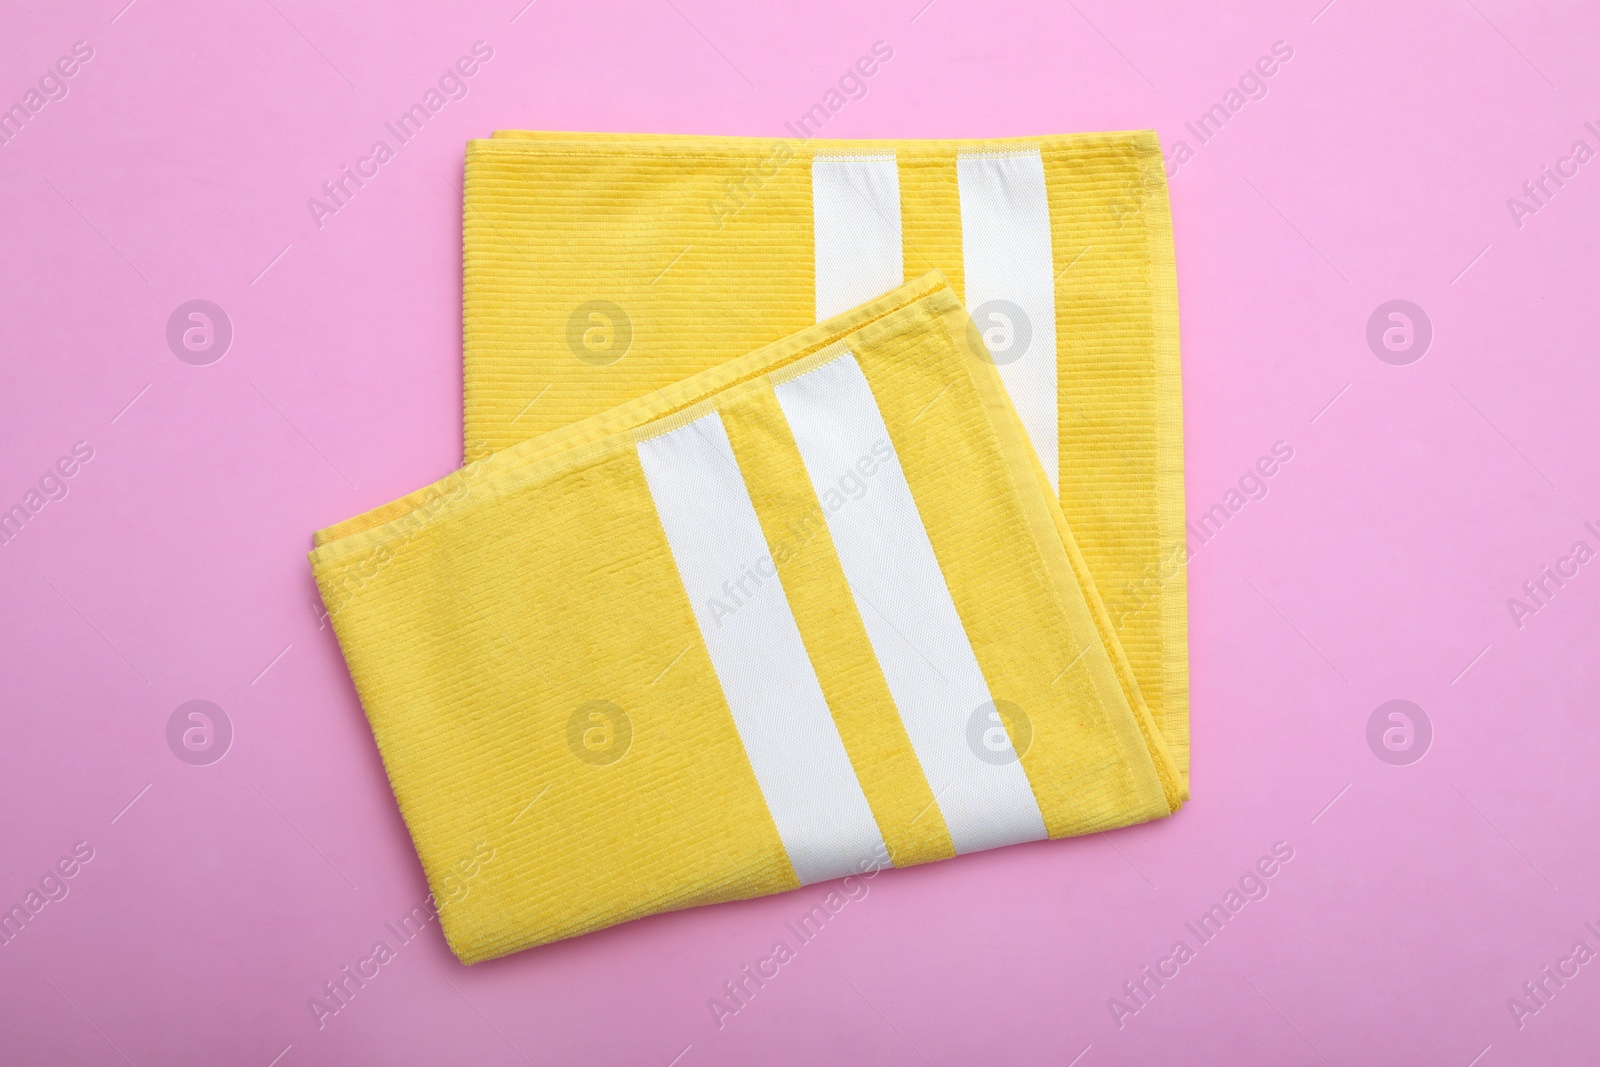 Photo of Folded striped beach towel on pink background, top view